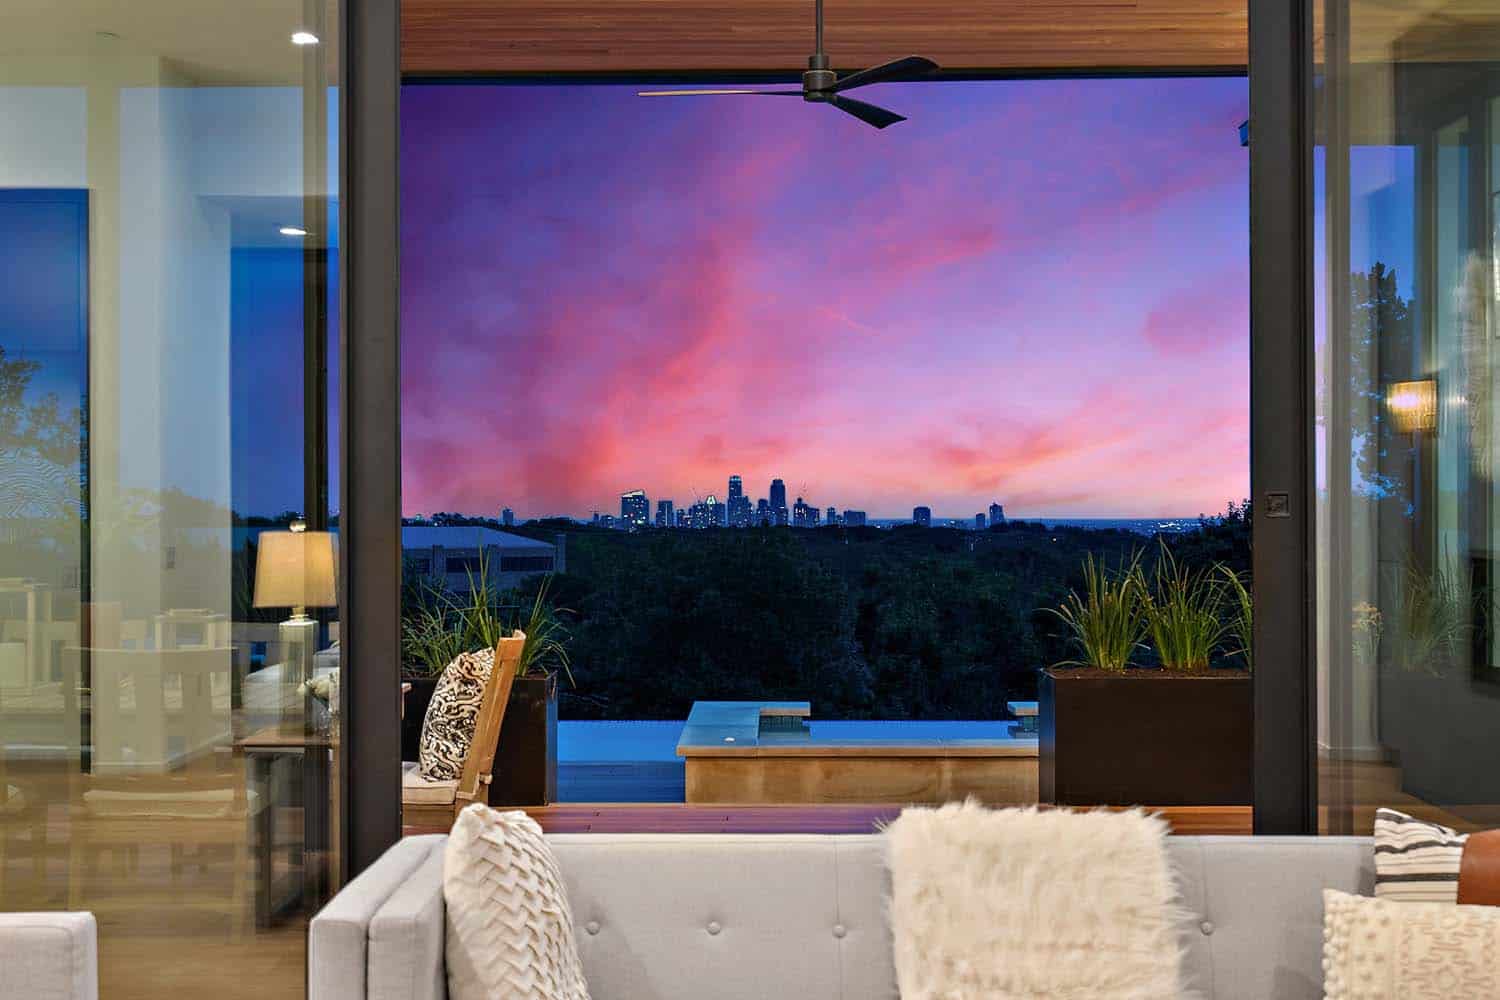 modern living room with a view to the pool at dusk